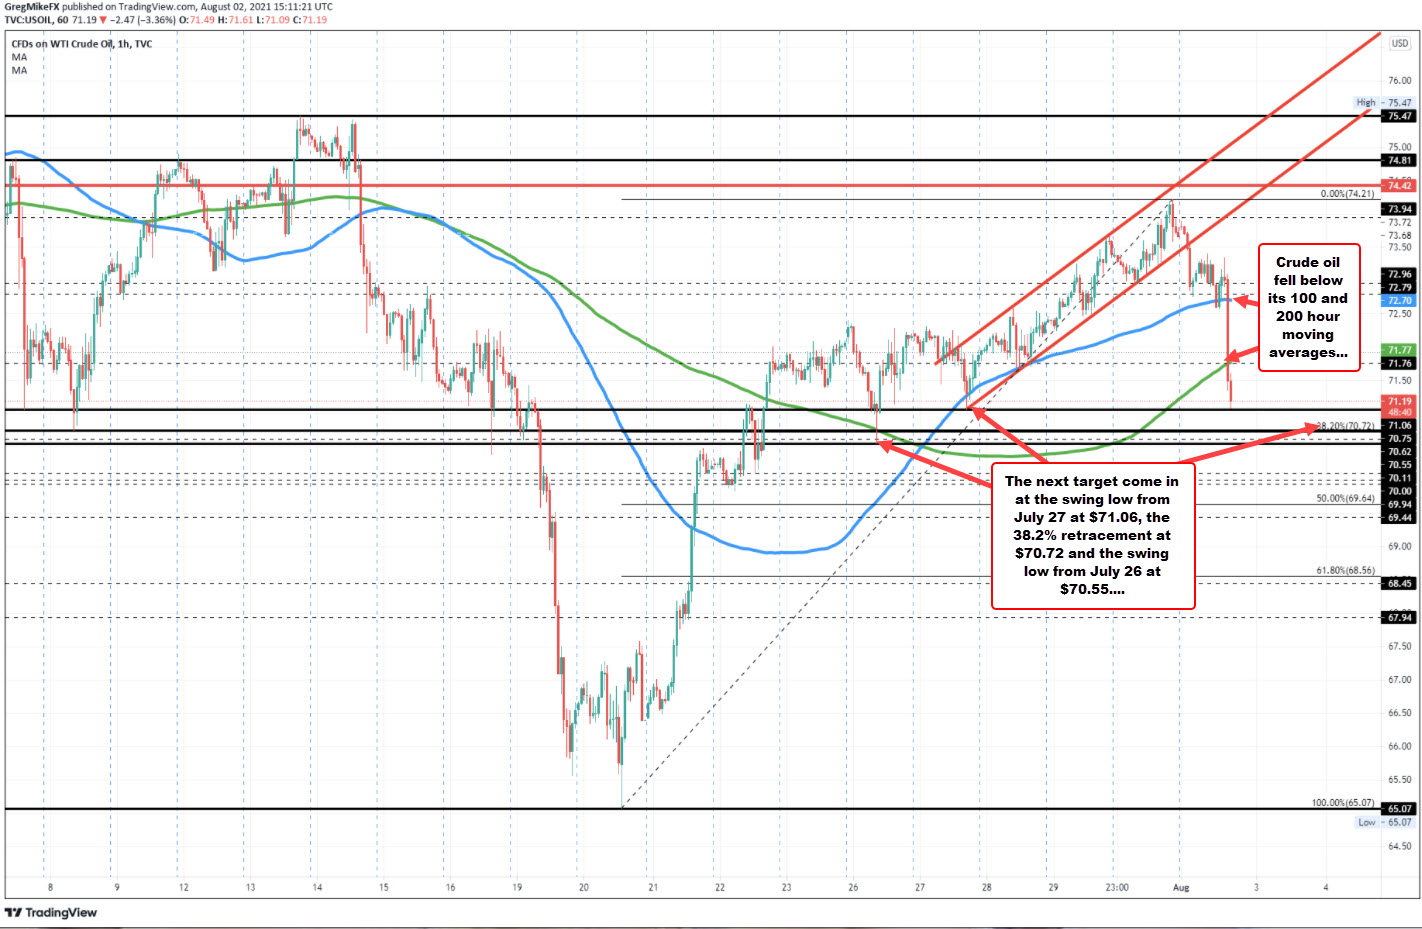 Price breaks below its 100 and 200 hour moving averages on the way to the downside_